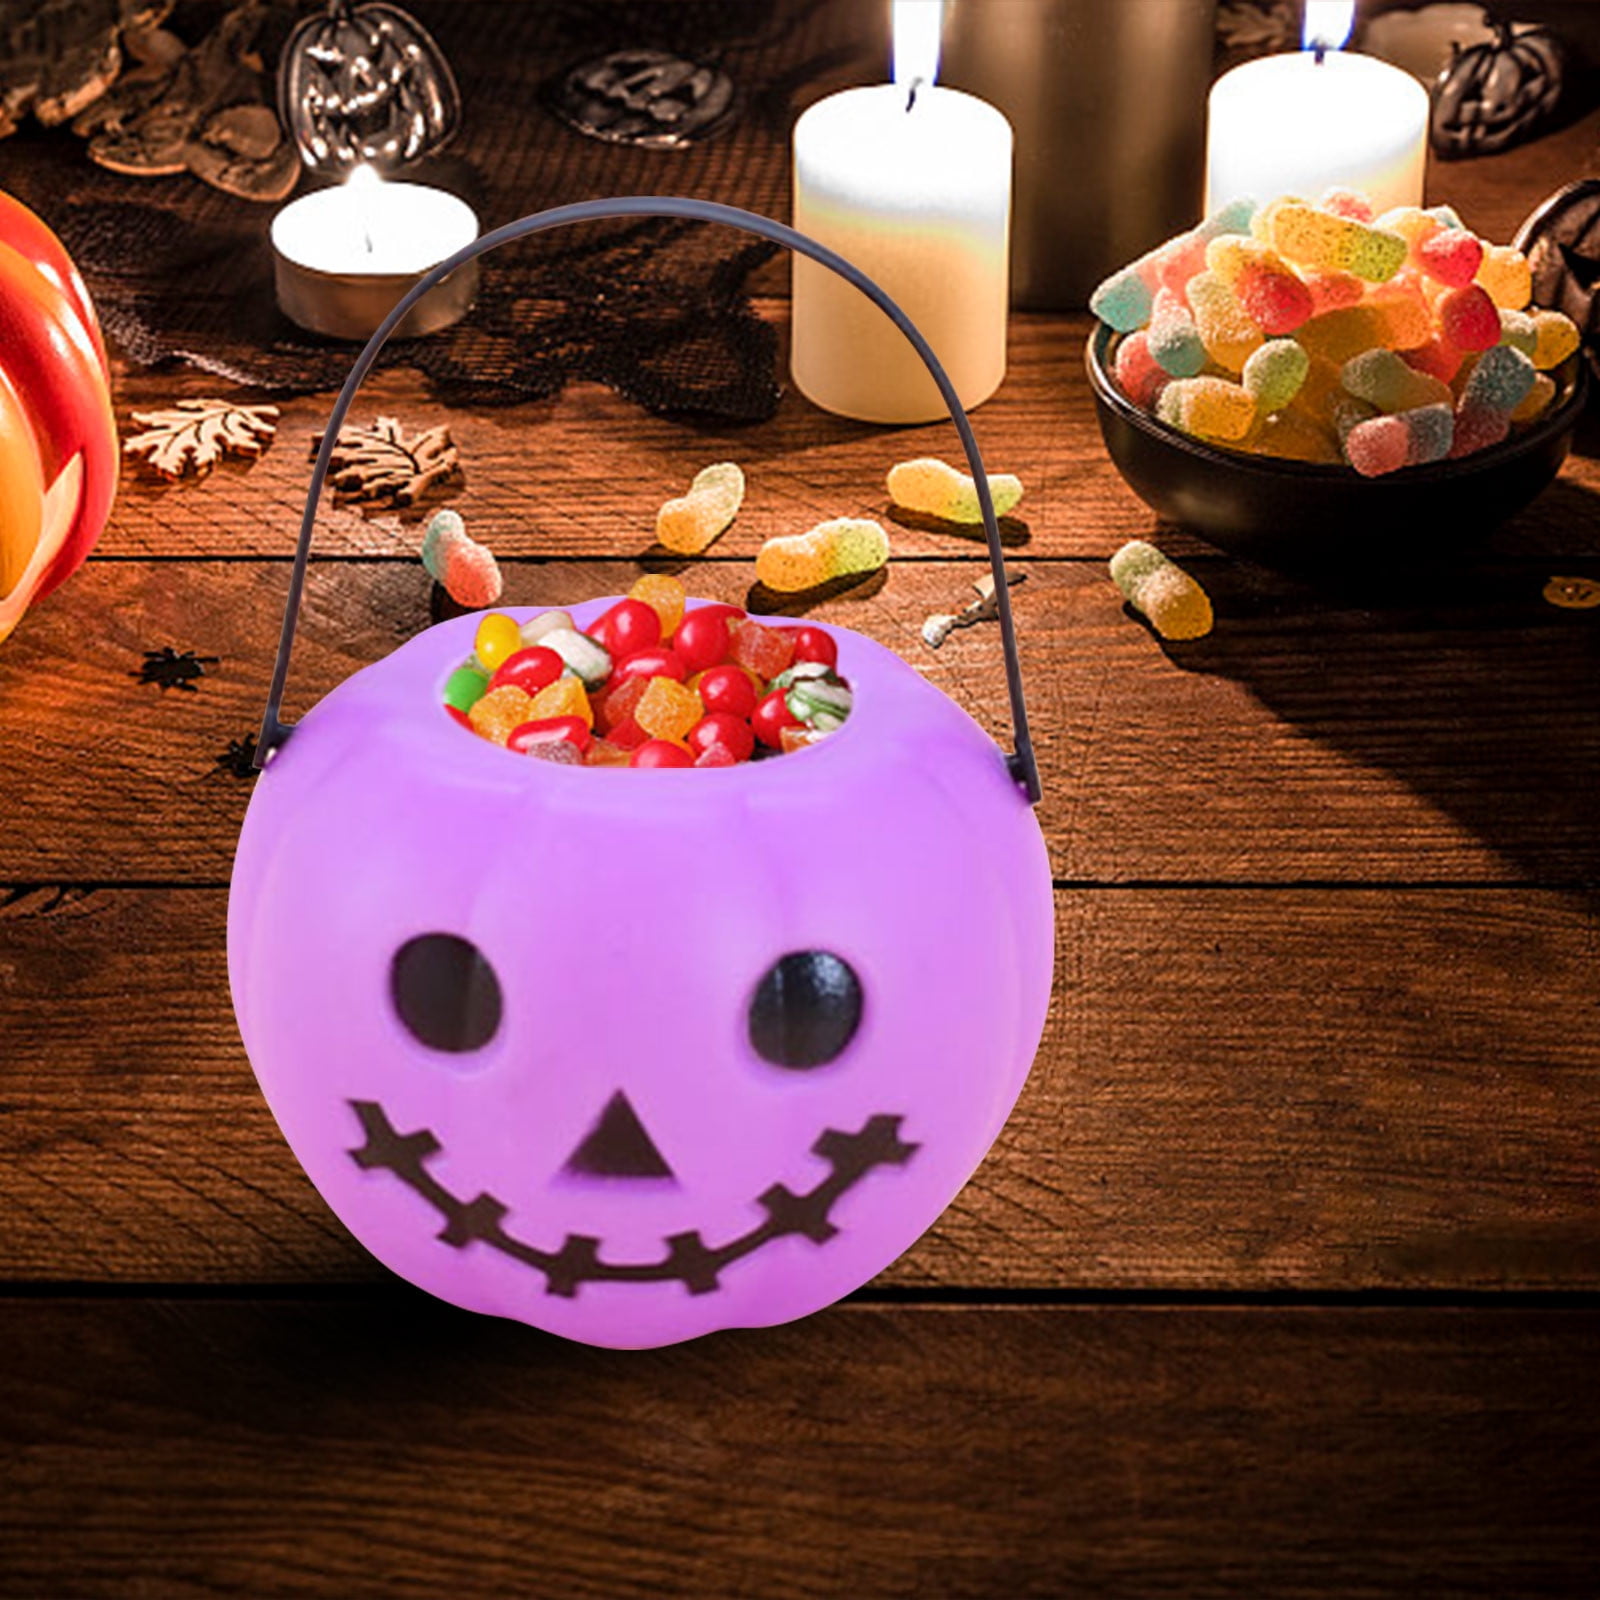 Scary ghost with halloween candy bucket and glowing Jack o lantern